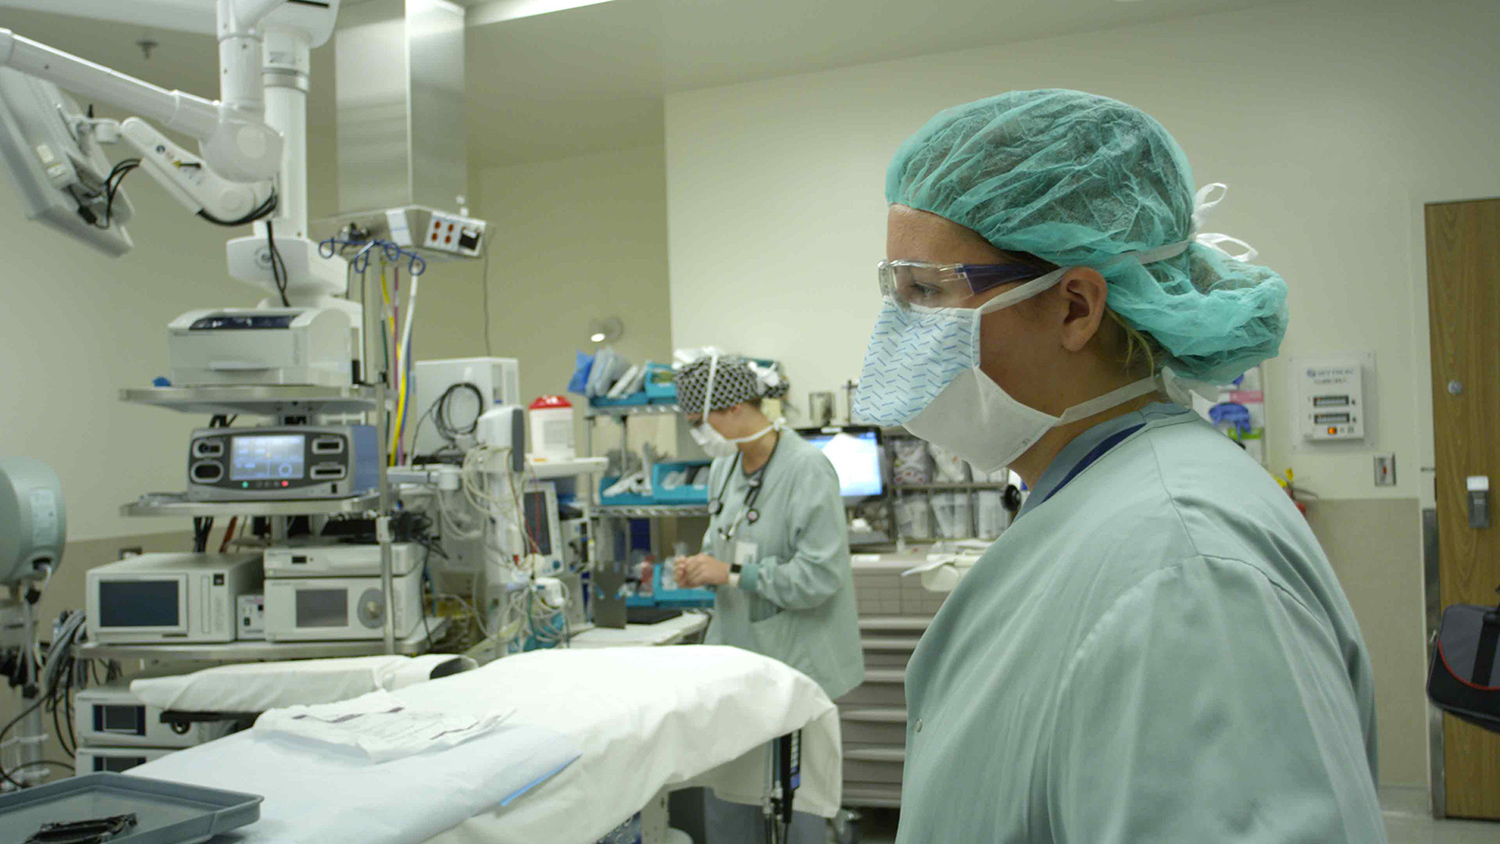 Student in an operating room with a medical professional